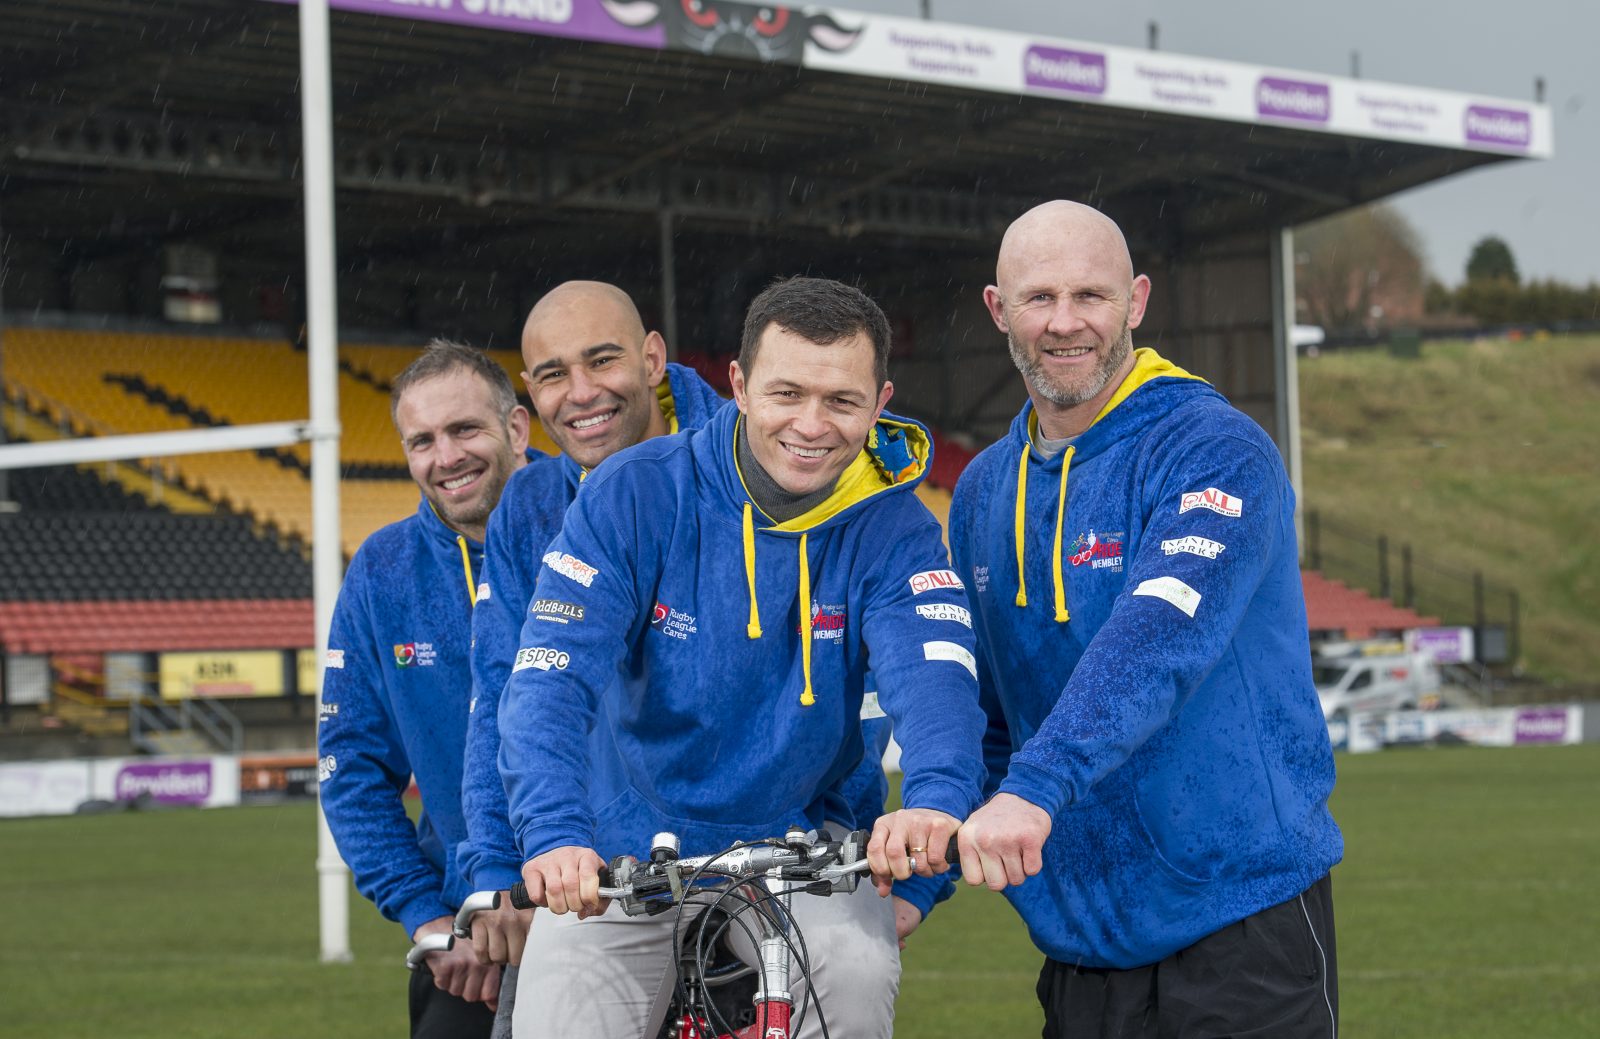 Robbie ready for his biggest challenge on the UK Red Ride to Wembley